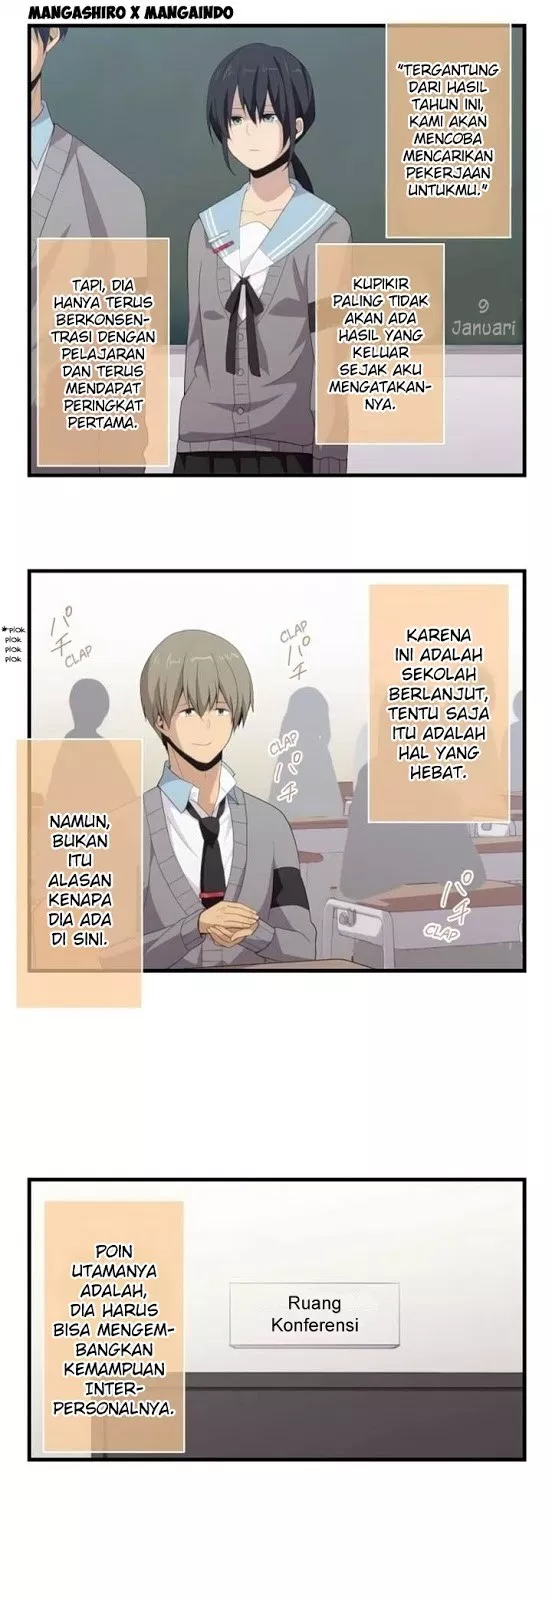 ReLIFE Chapter 114